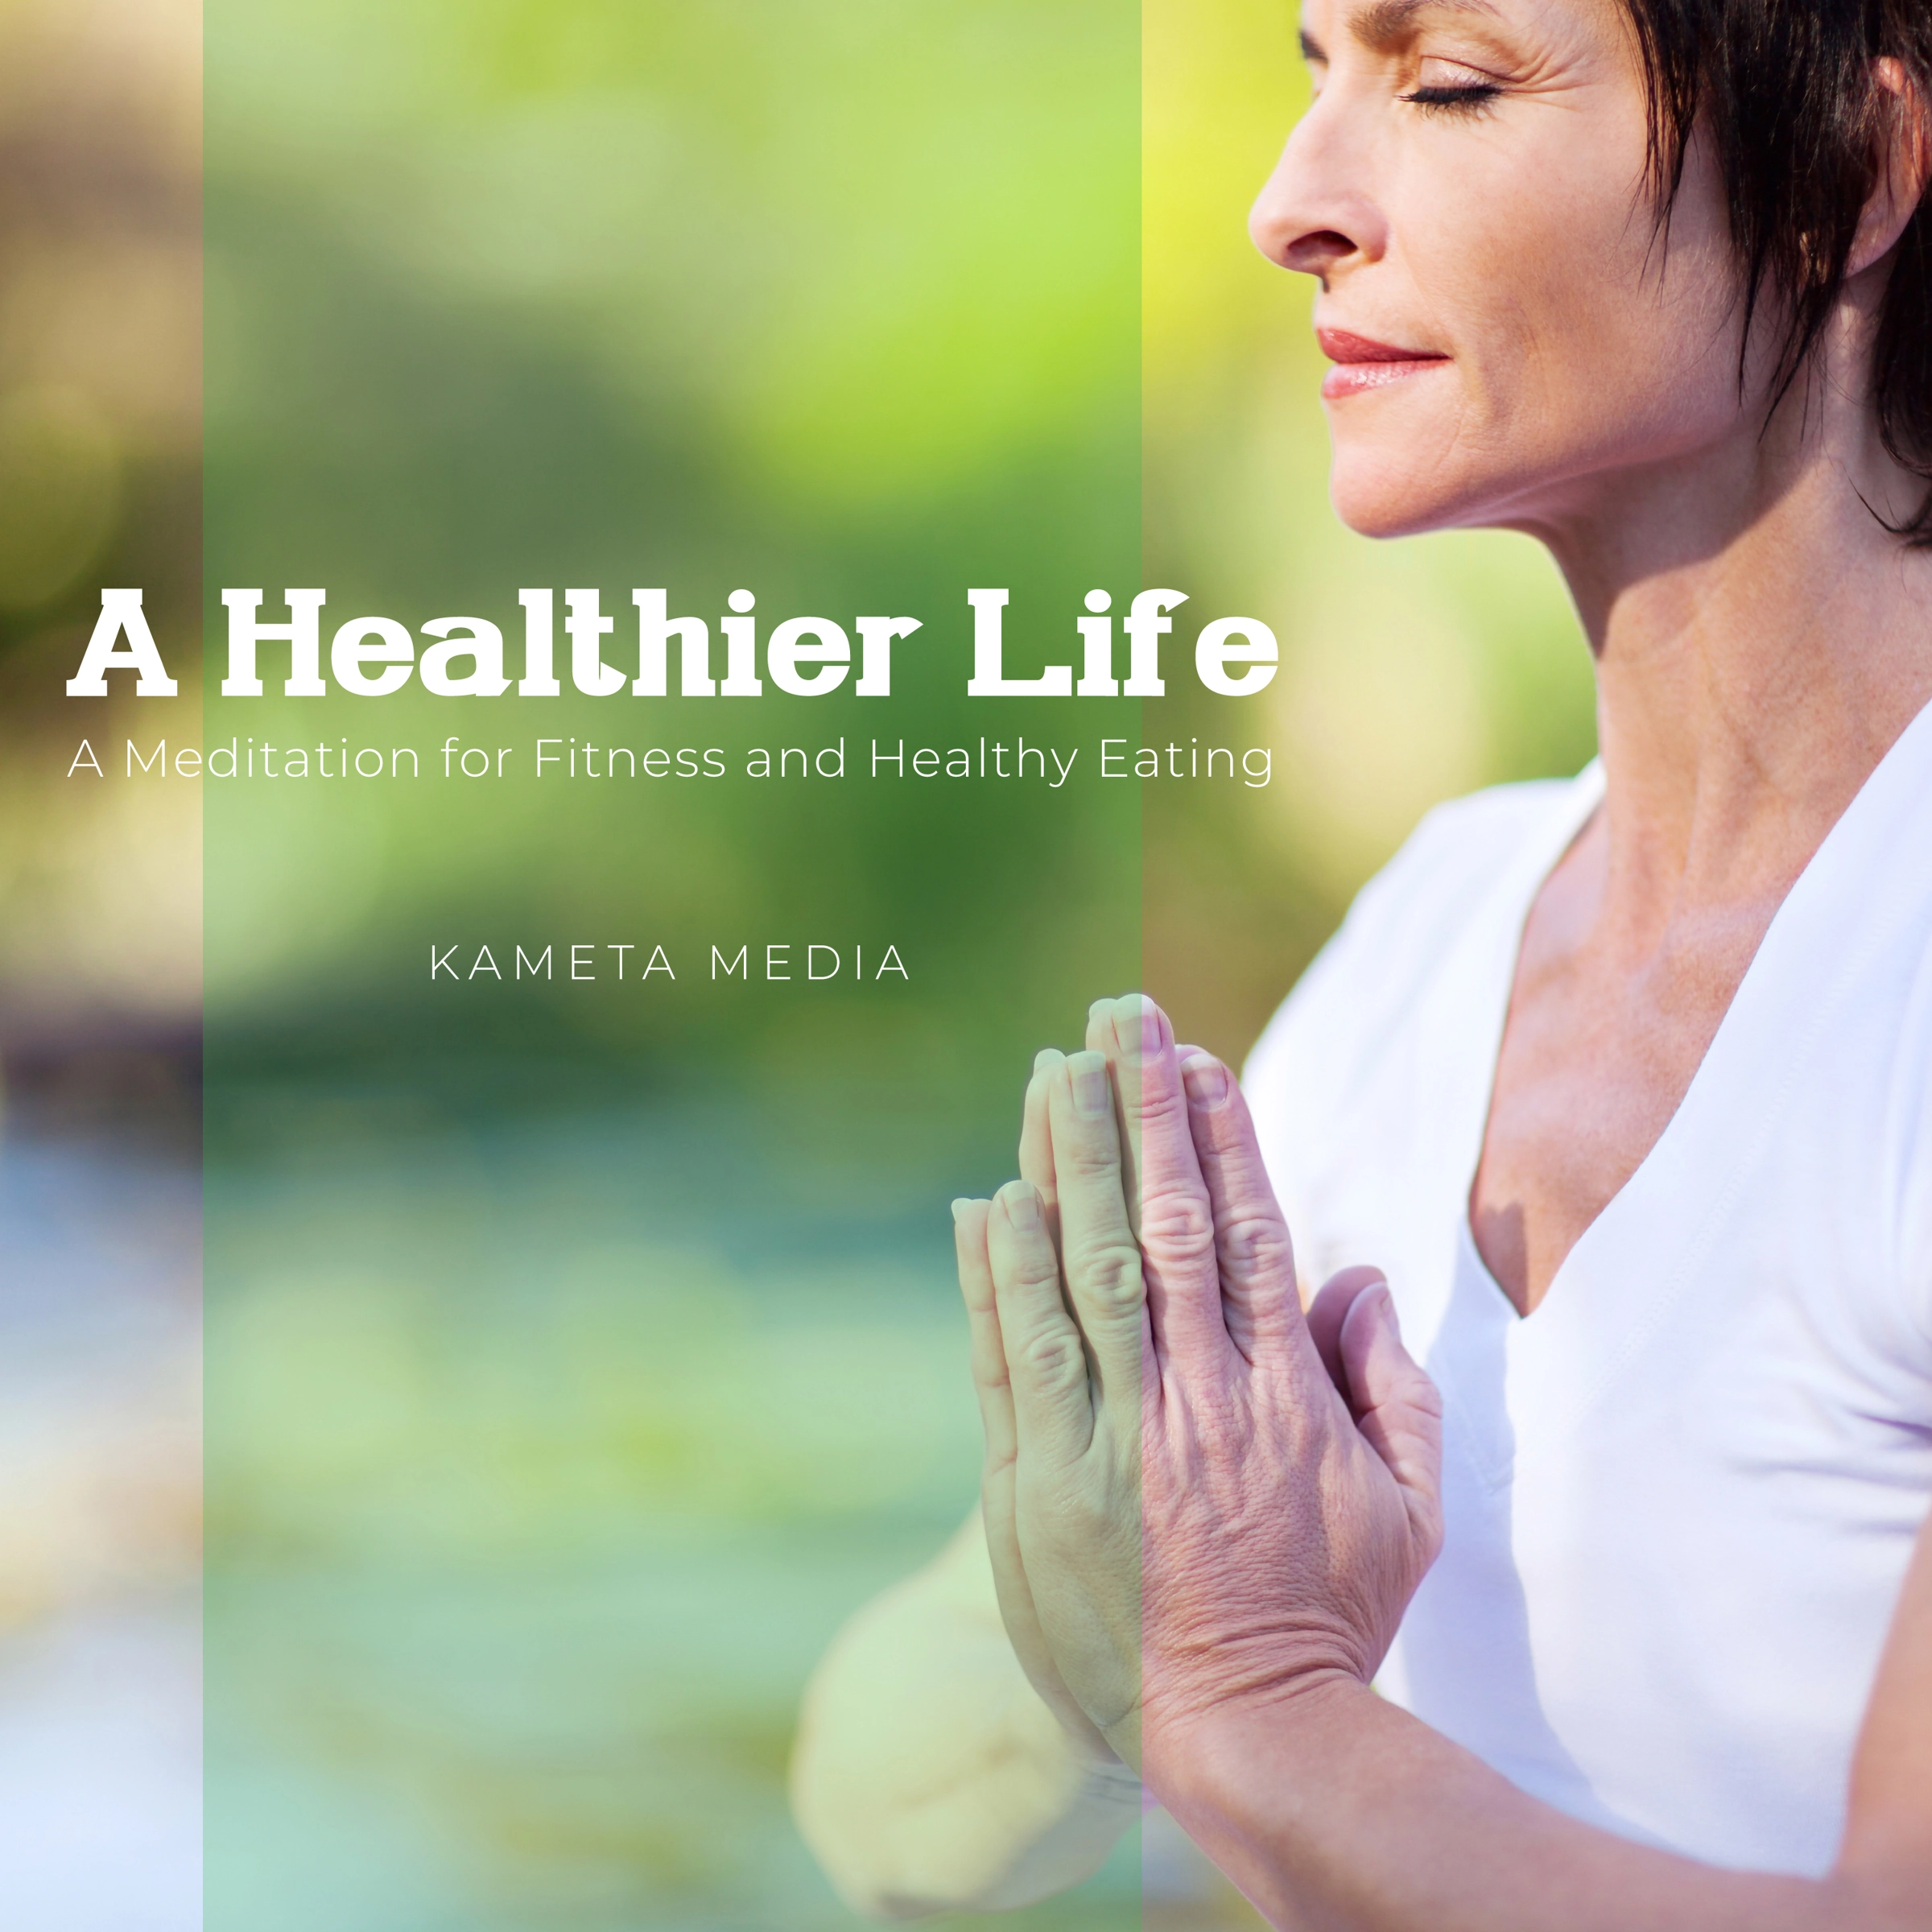 A Healthier Life: A Meditation for Fitness and Healthy Eating Audiobook by Kameta Media